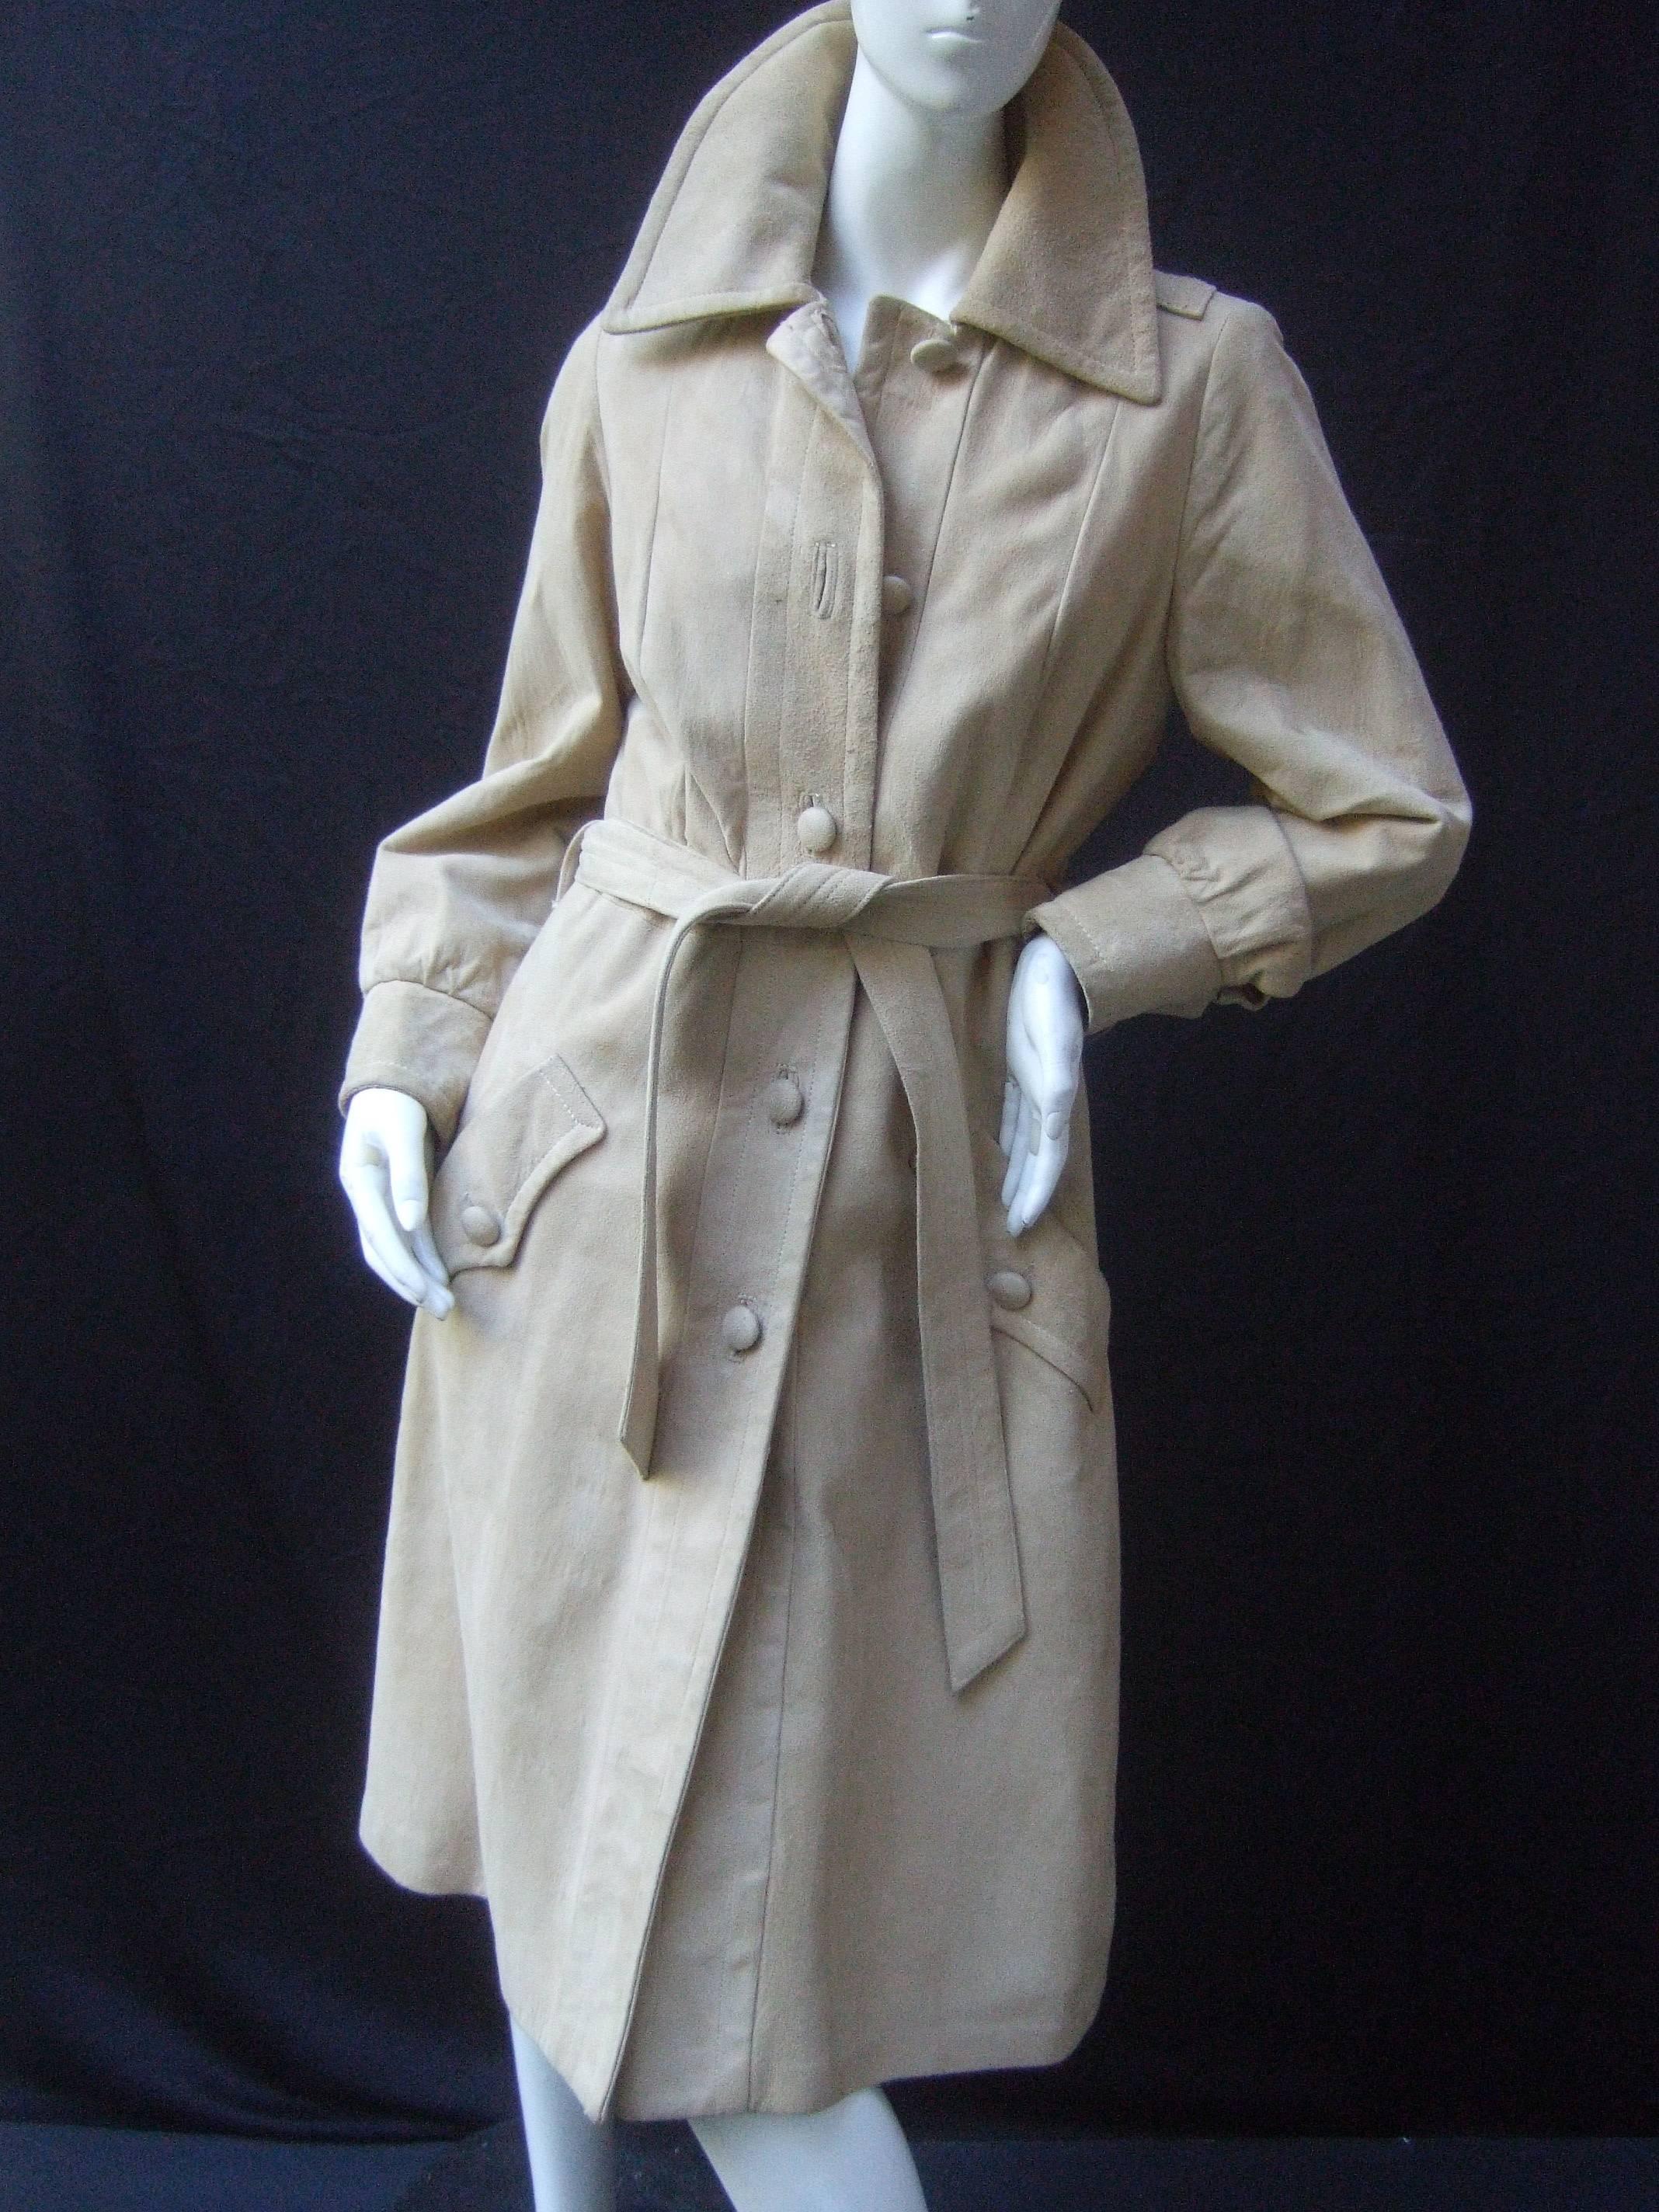 1970s Plush tan doeskin suede belted trench coat
The stylish coat is designed with powdery soft suede
The collar has wide lapels that can be folded up around 
the neck

The coat secures with five suede covered matching
buttons that run down